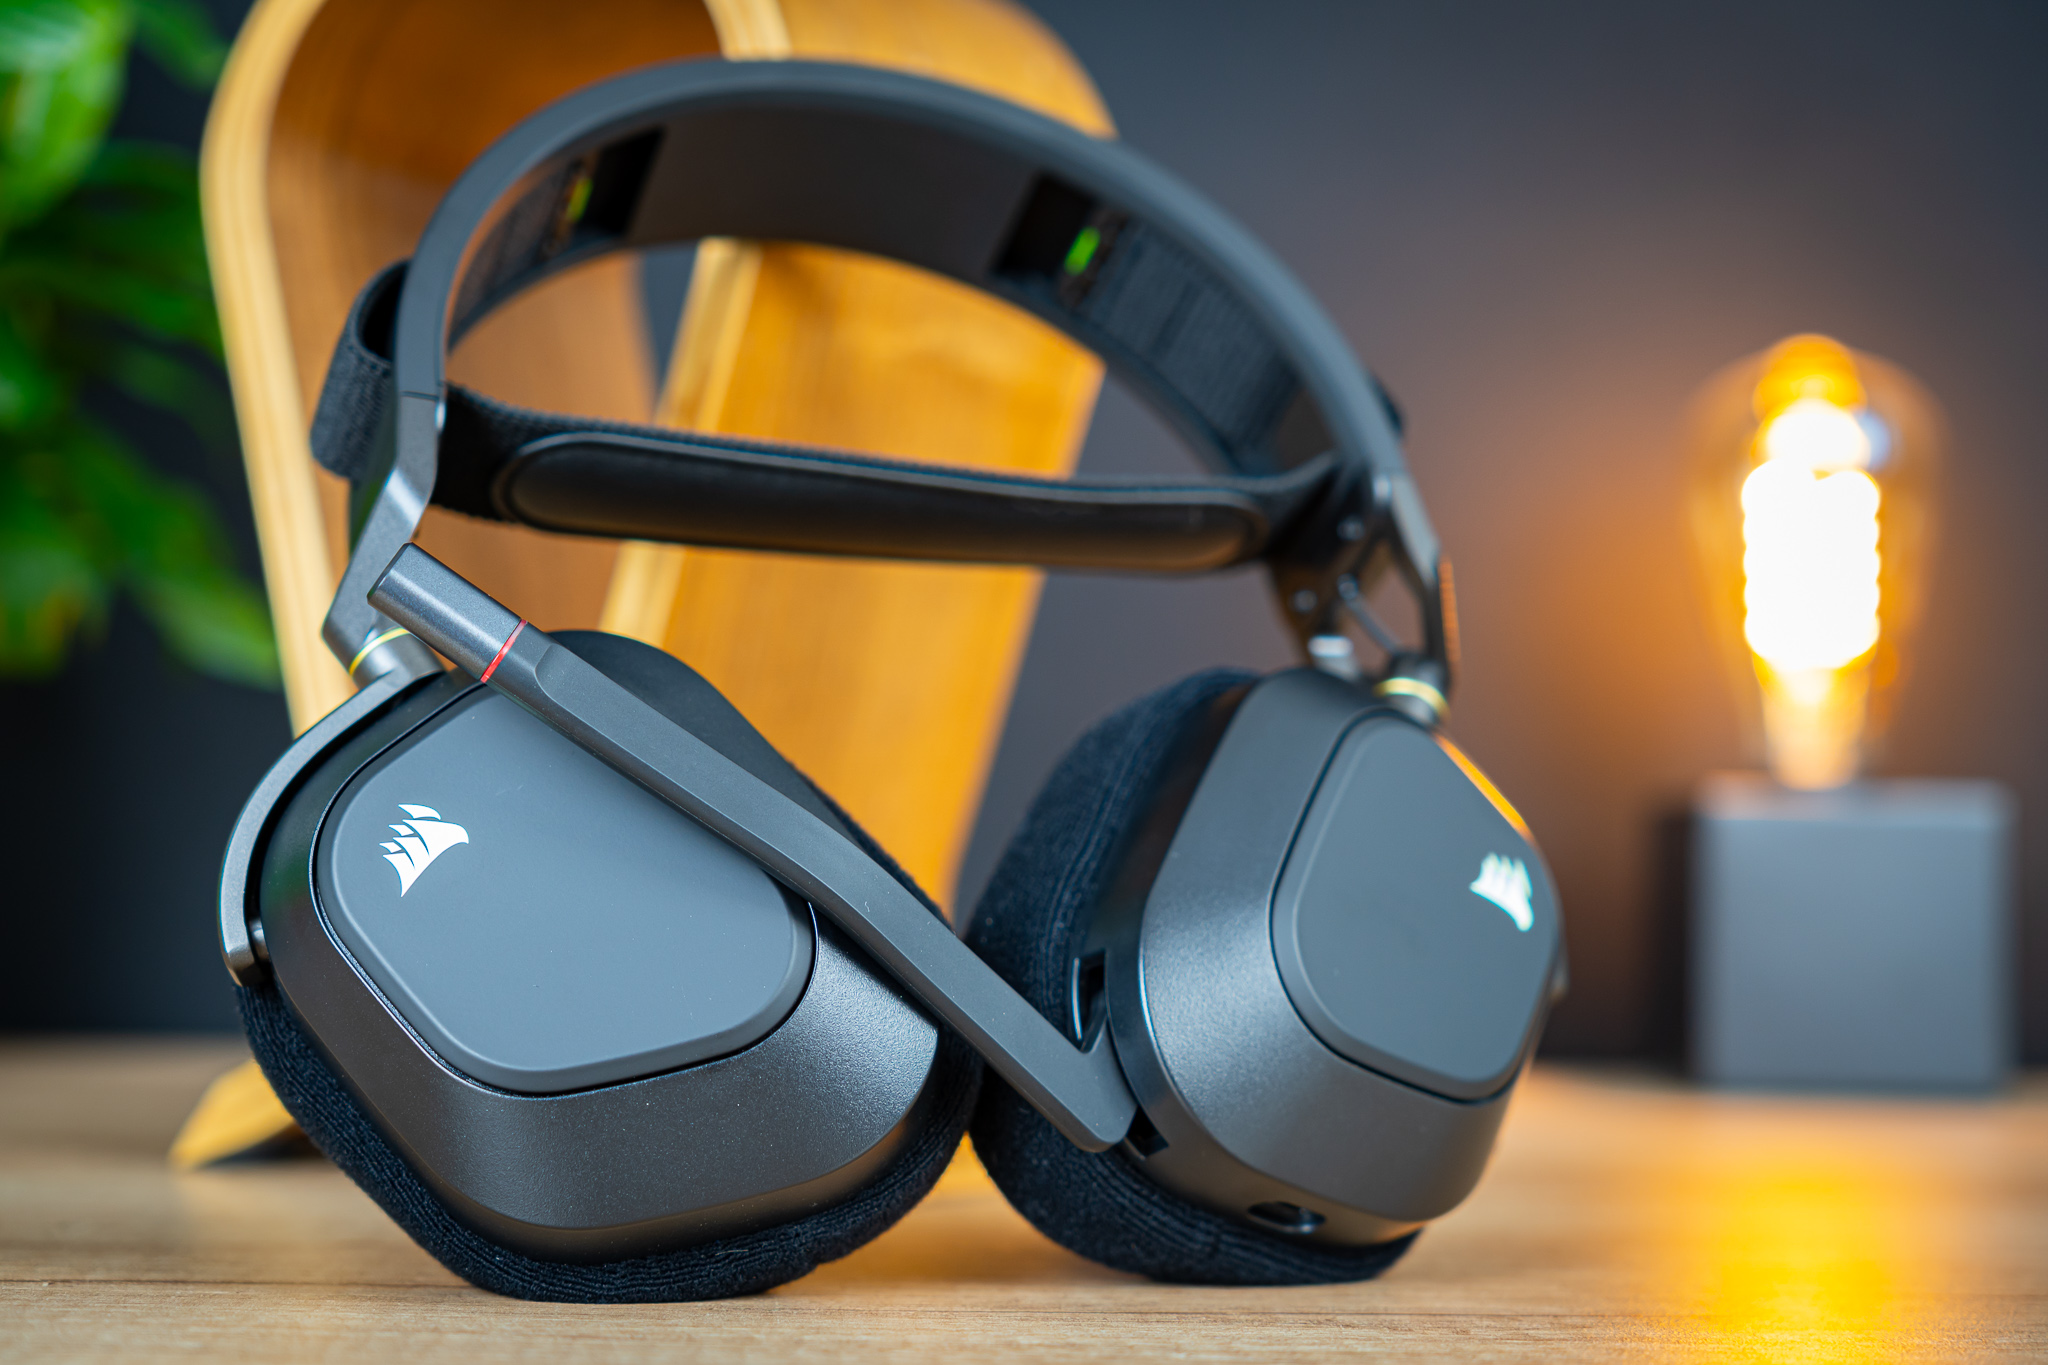 Corsair Virtuoso RGB Wireless XT review: The obvious upgrade for PS5 gamers